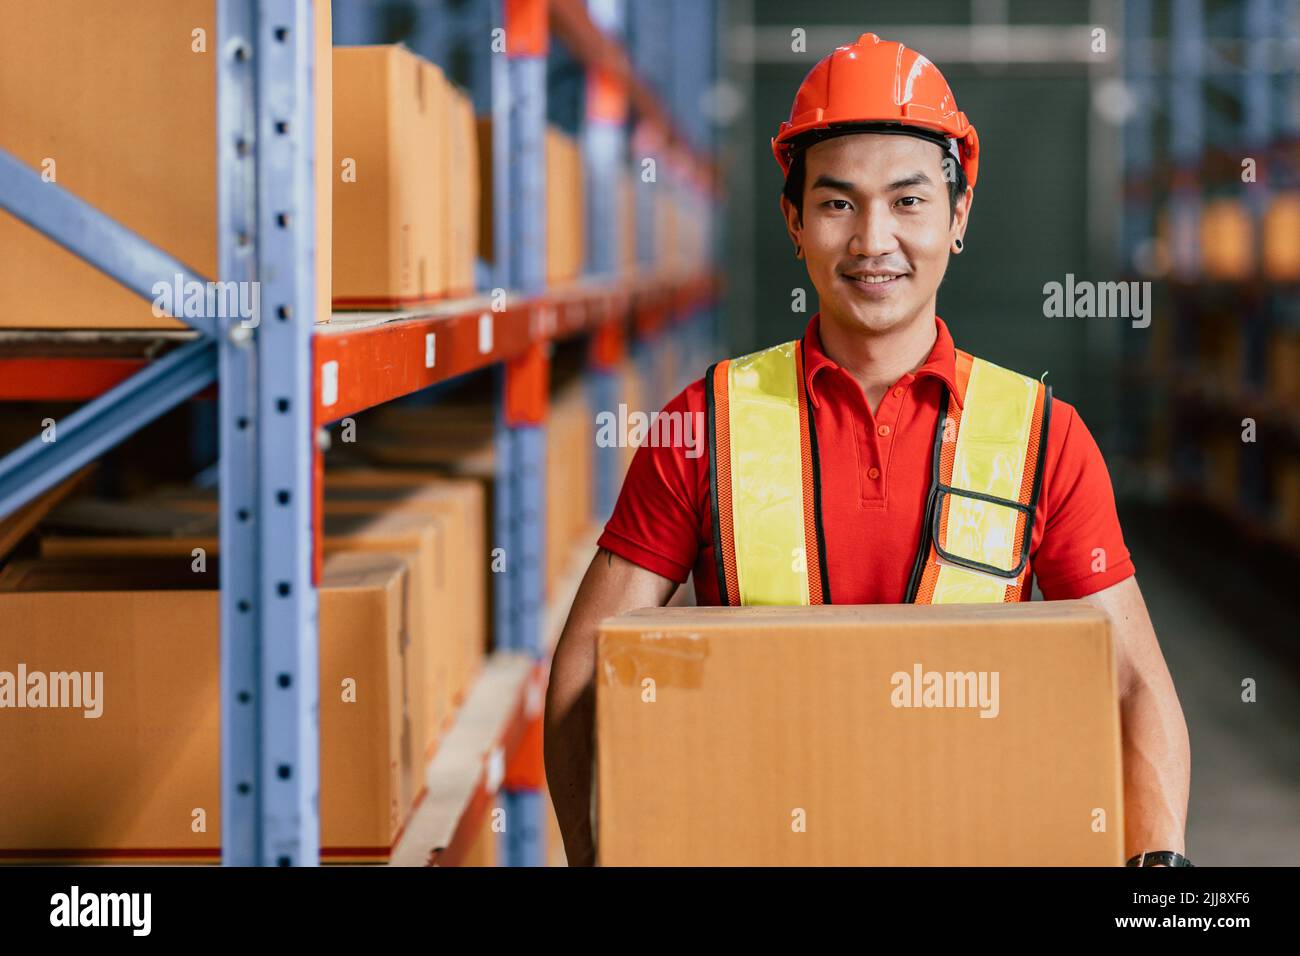 Warehouse staff worker at cargo inventory handle goods products box portrait happy smiling Stock Photo